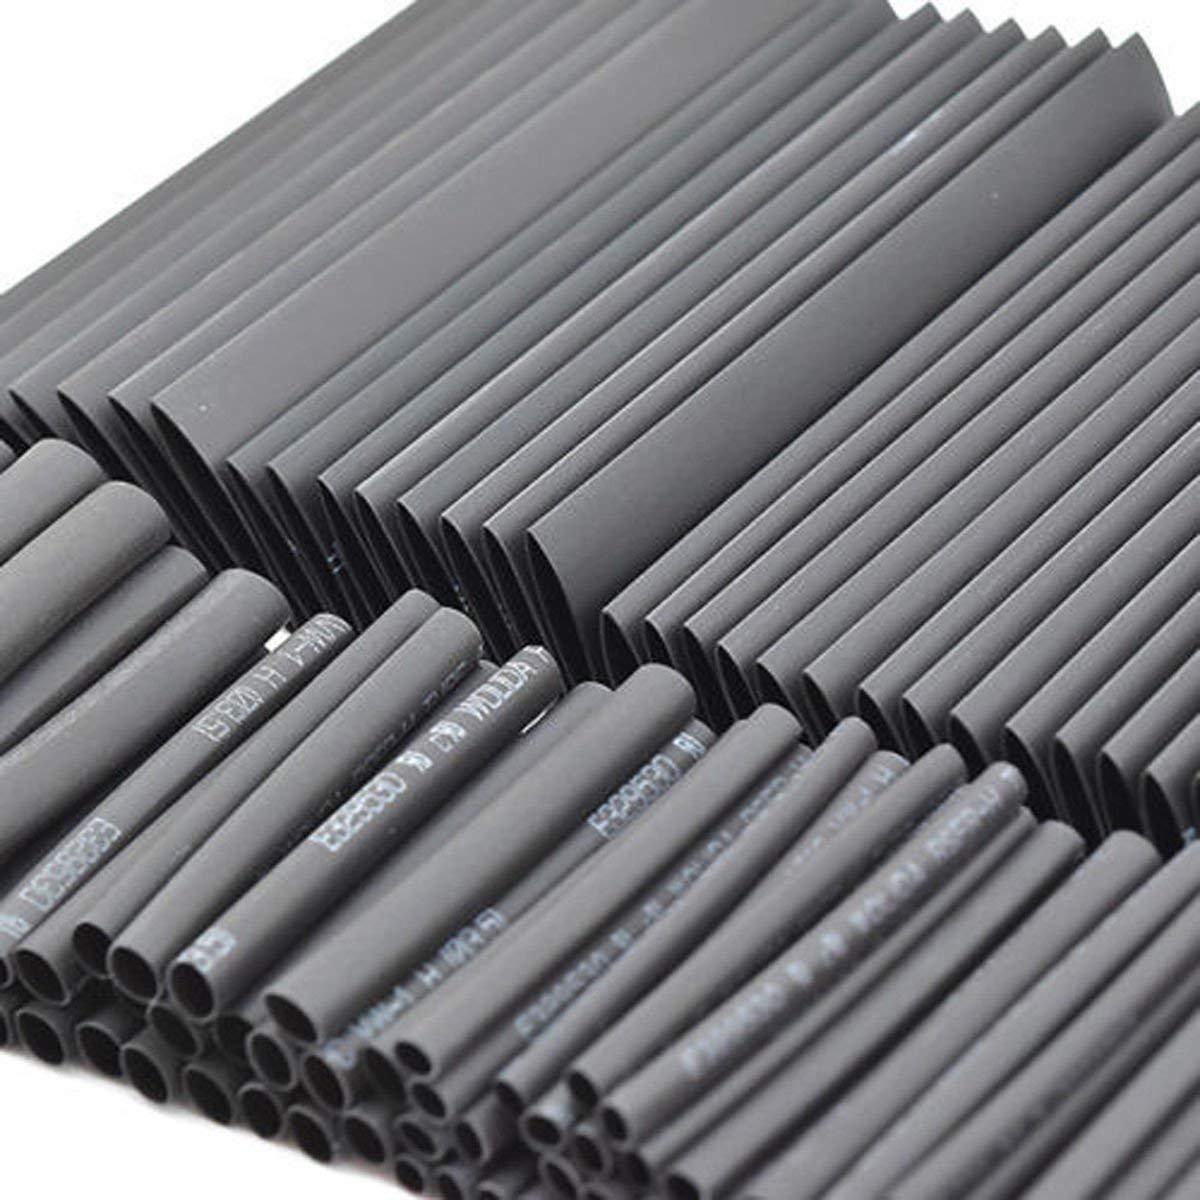 127-Piece Heat Shrink Tubing Set for Electrical Wires - Assorted Wrap Cable Kit